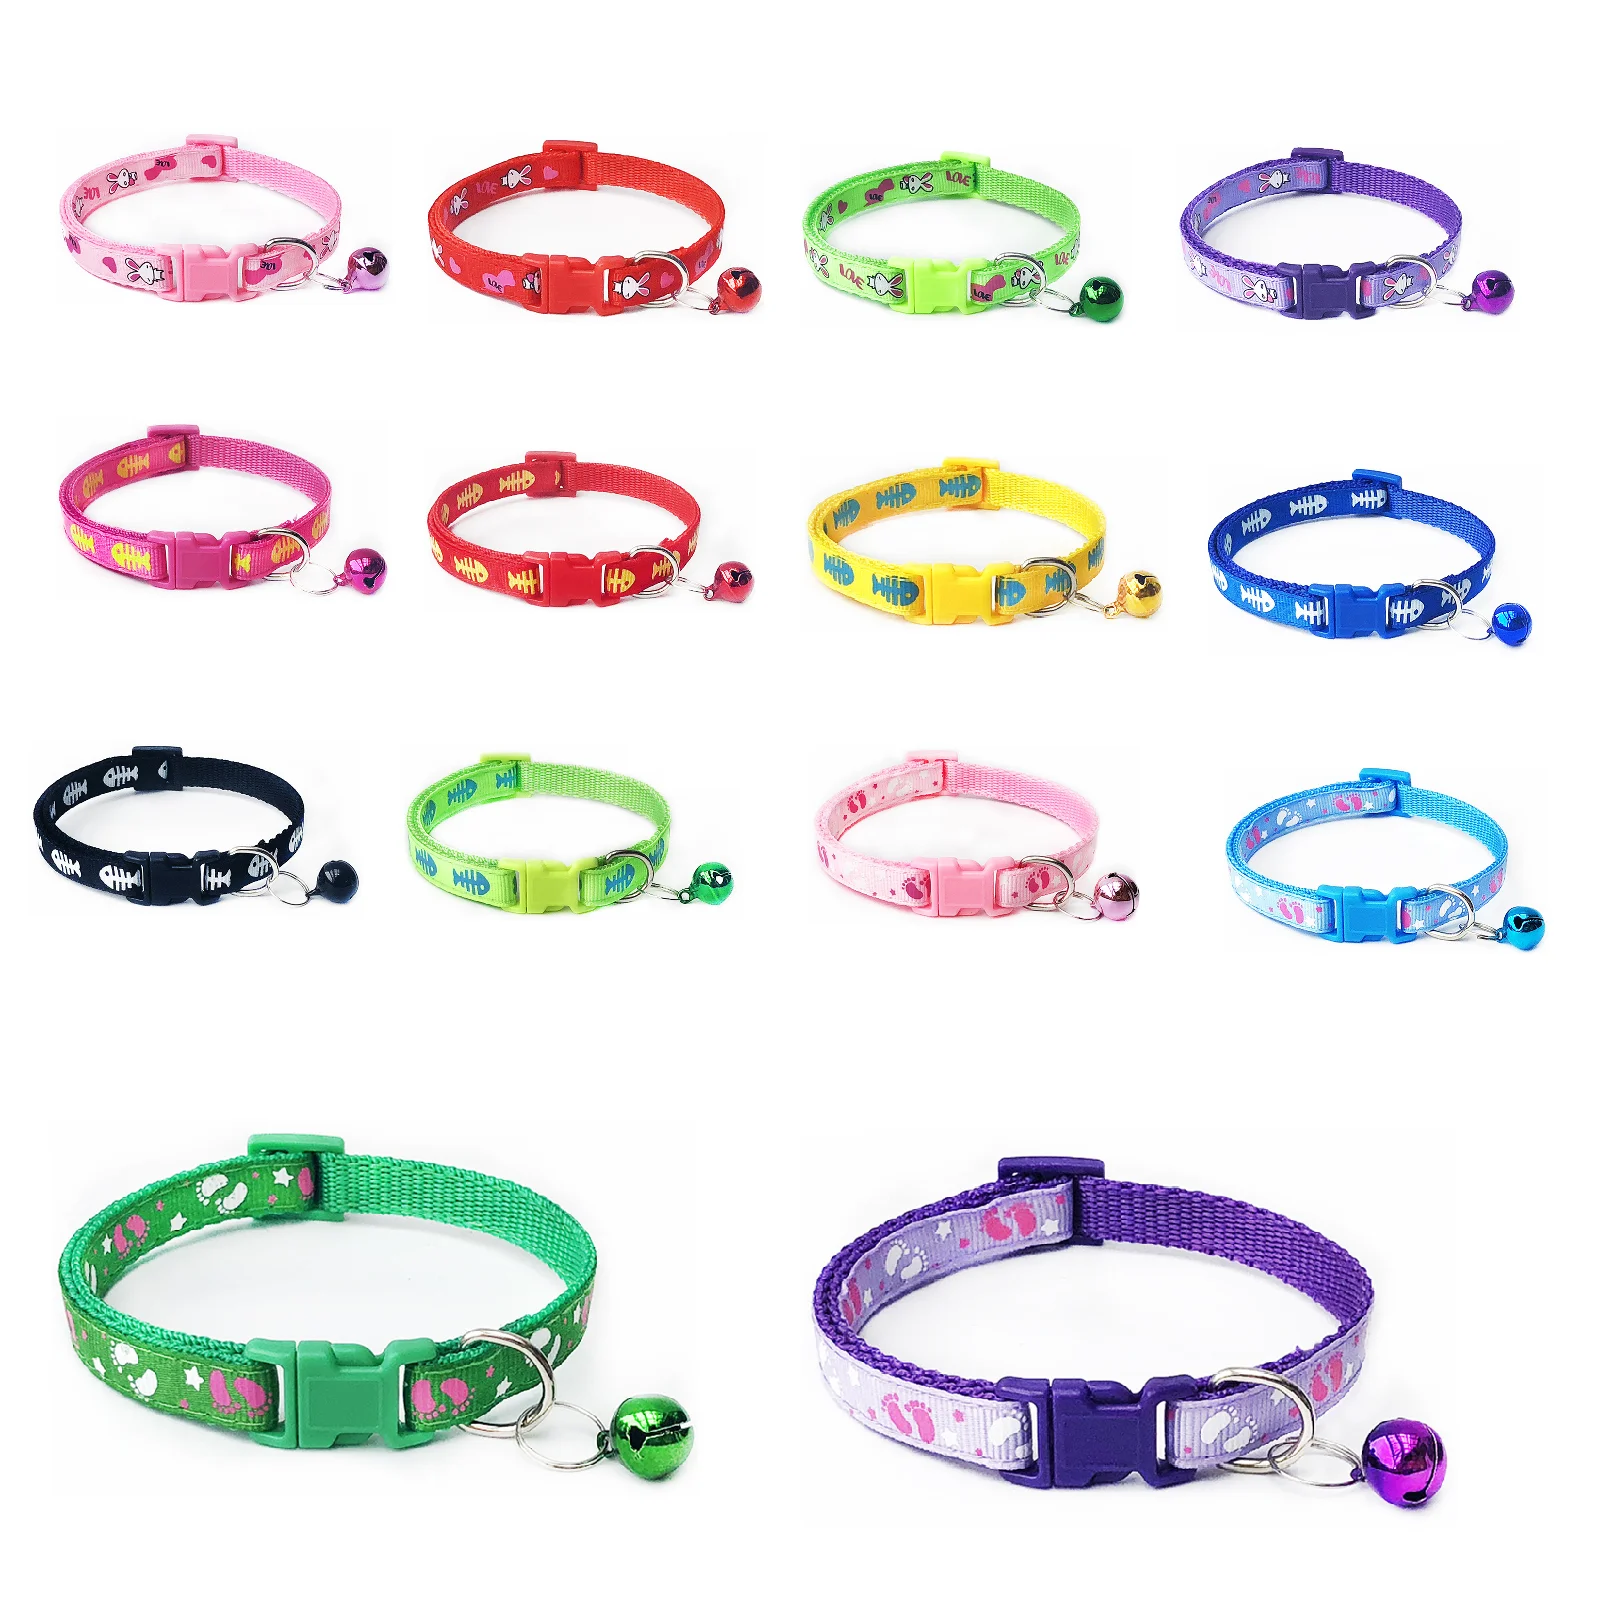 1pc Cartoon Dog Cat Collars With Bell Adjustable Polyester Buckle Collar Cat Pet Supplies Accessories Collar Small Dog Necklace collars with cat rings puppy necklaces beautiful pet bell necklaces pet accessories cat dog bell collar cute pet cat bow preppy